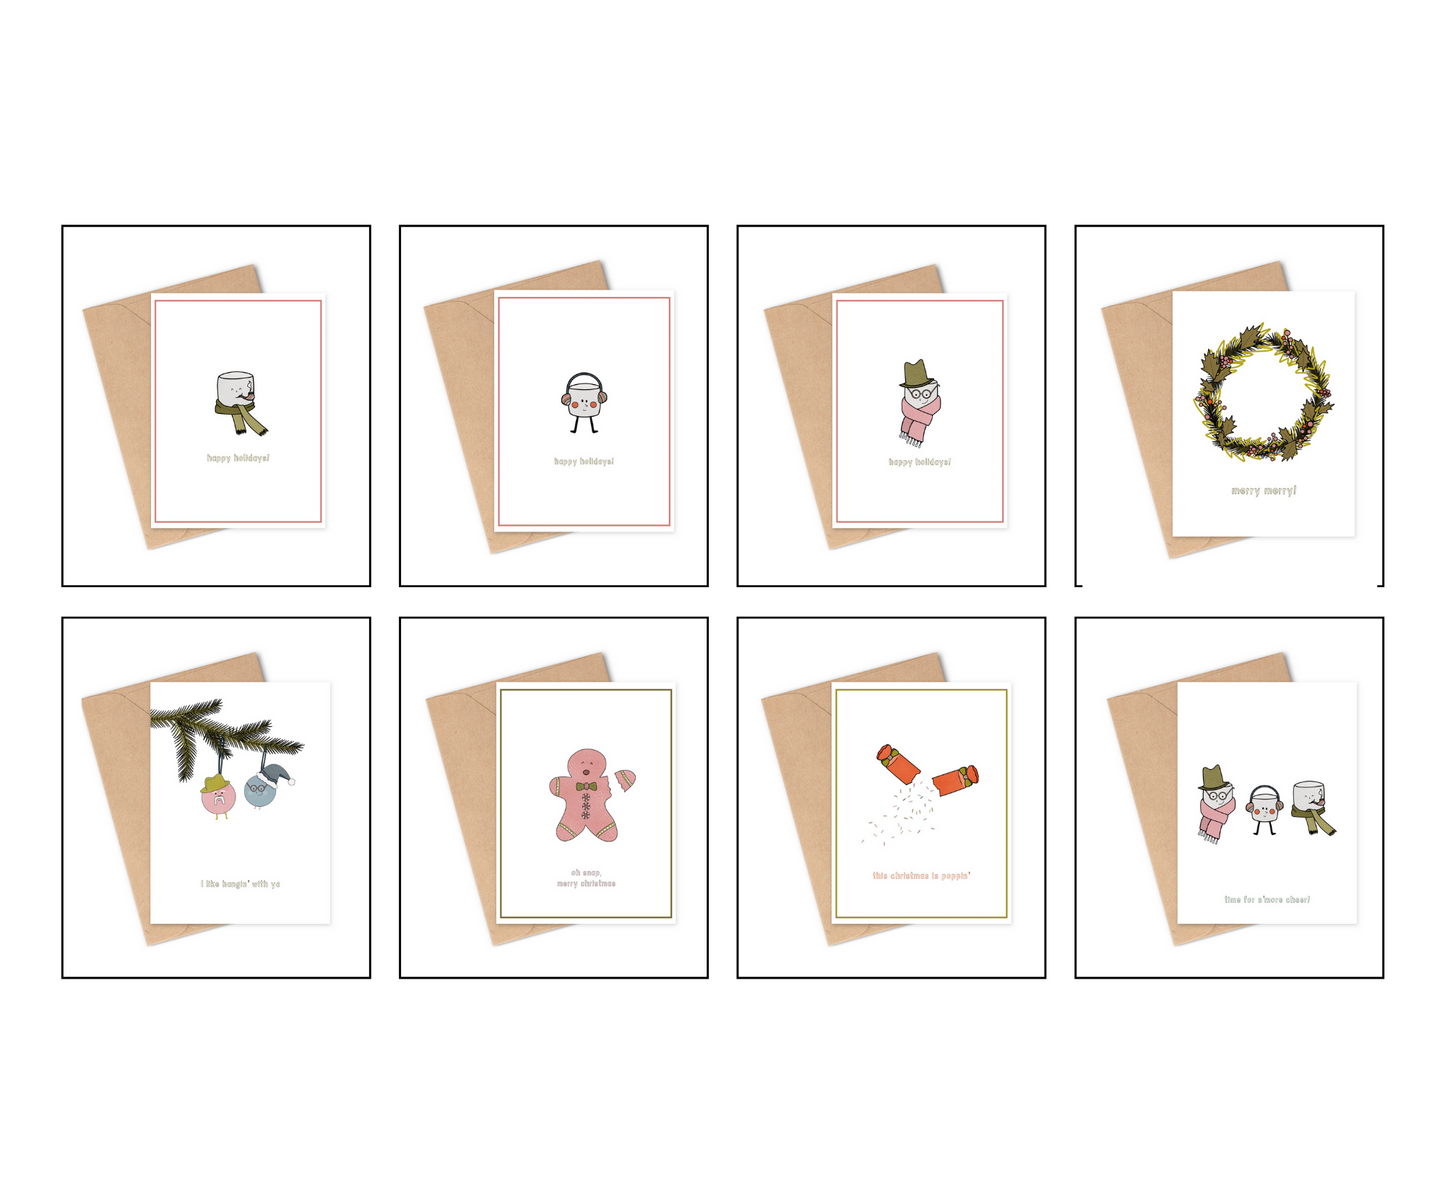 All 8 greeting cards in the london sister's christmas card collection